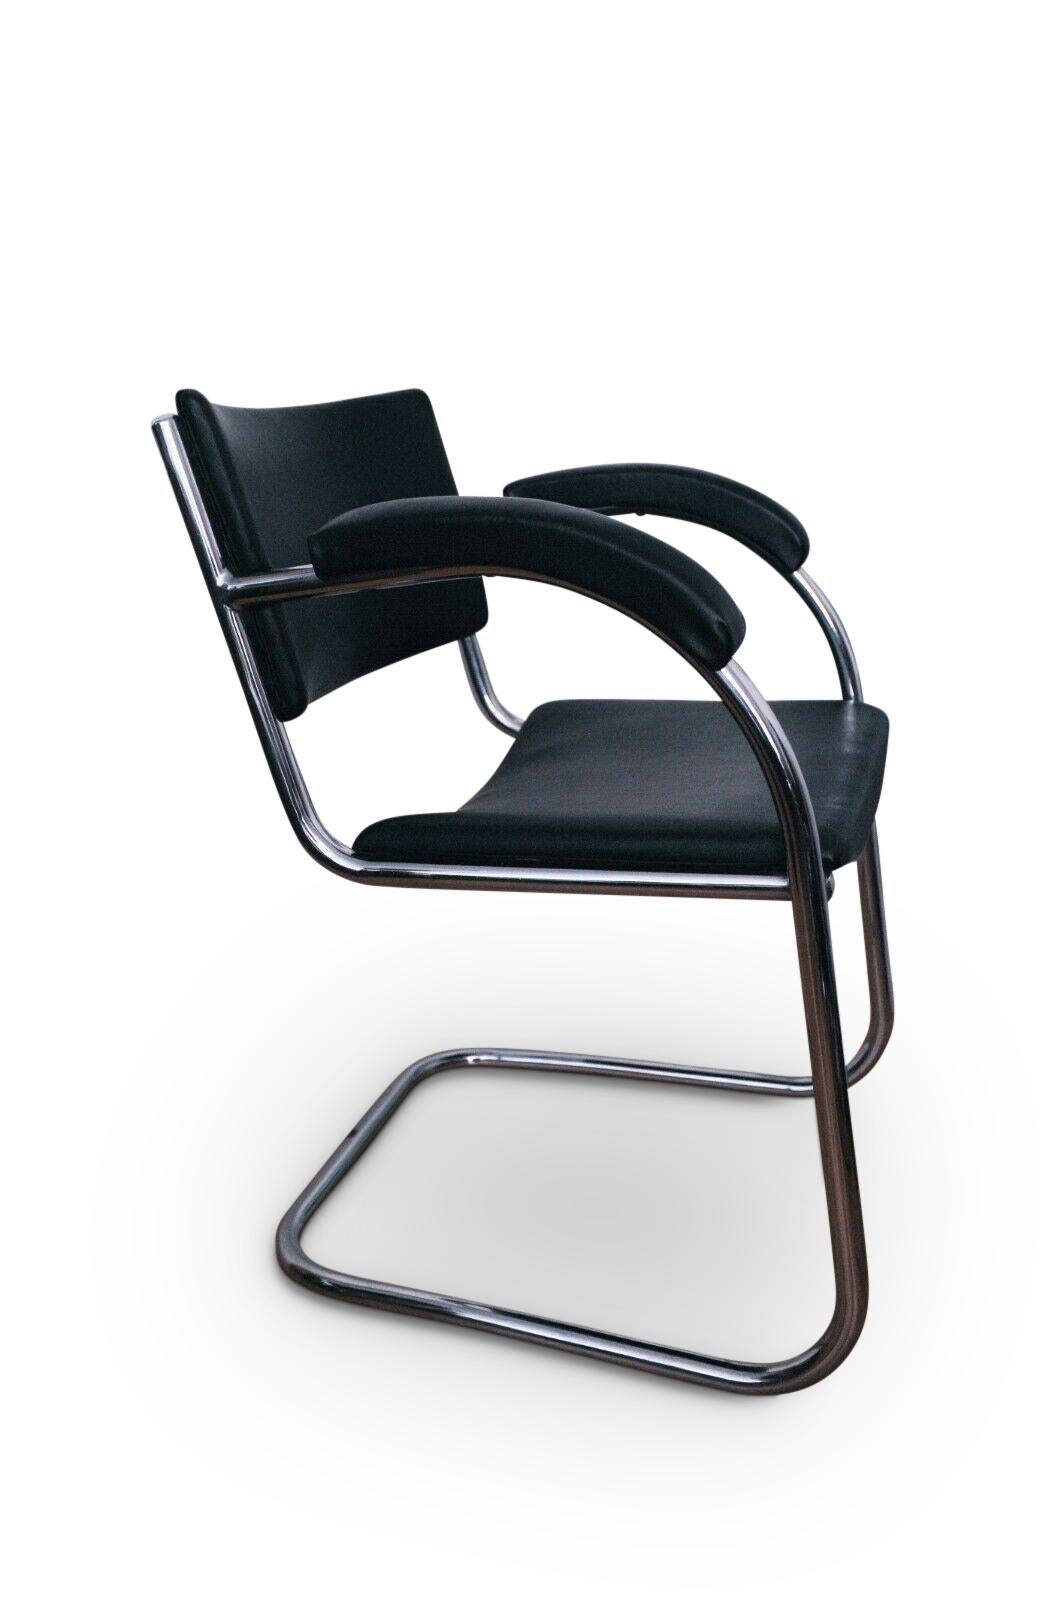 Iconic SP9 chrome cantilever chair by PEL (Practical equipment ltd) 

English company took major influence from the German Bauhaus movement 
Metal makers mark applied to chair.

